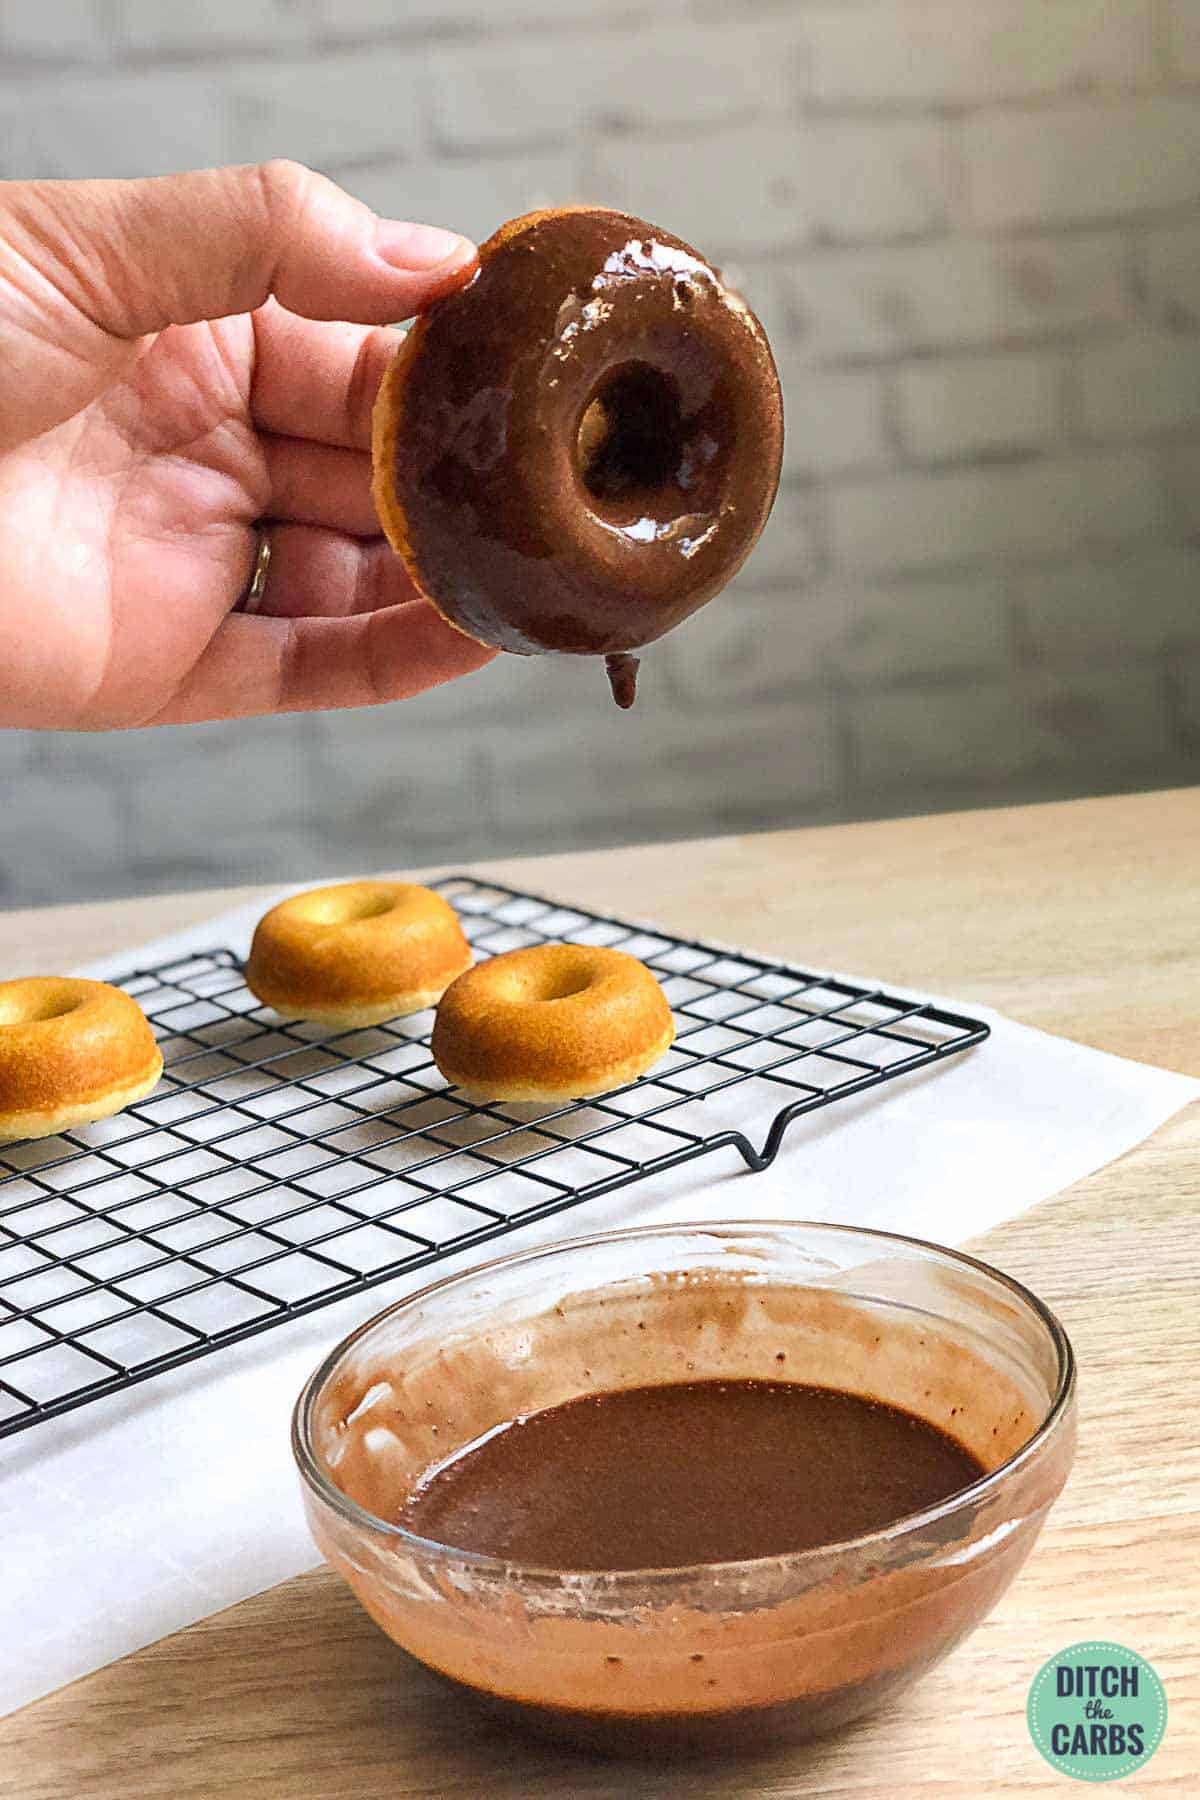 A hand is dipping an almond flour keto donut in a bowl of chocolate icing.